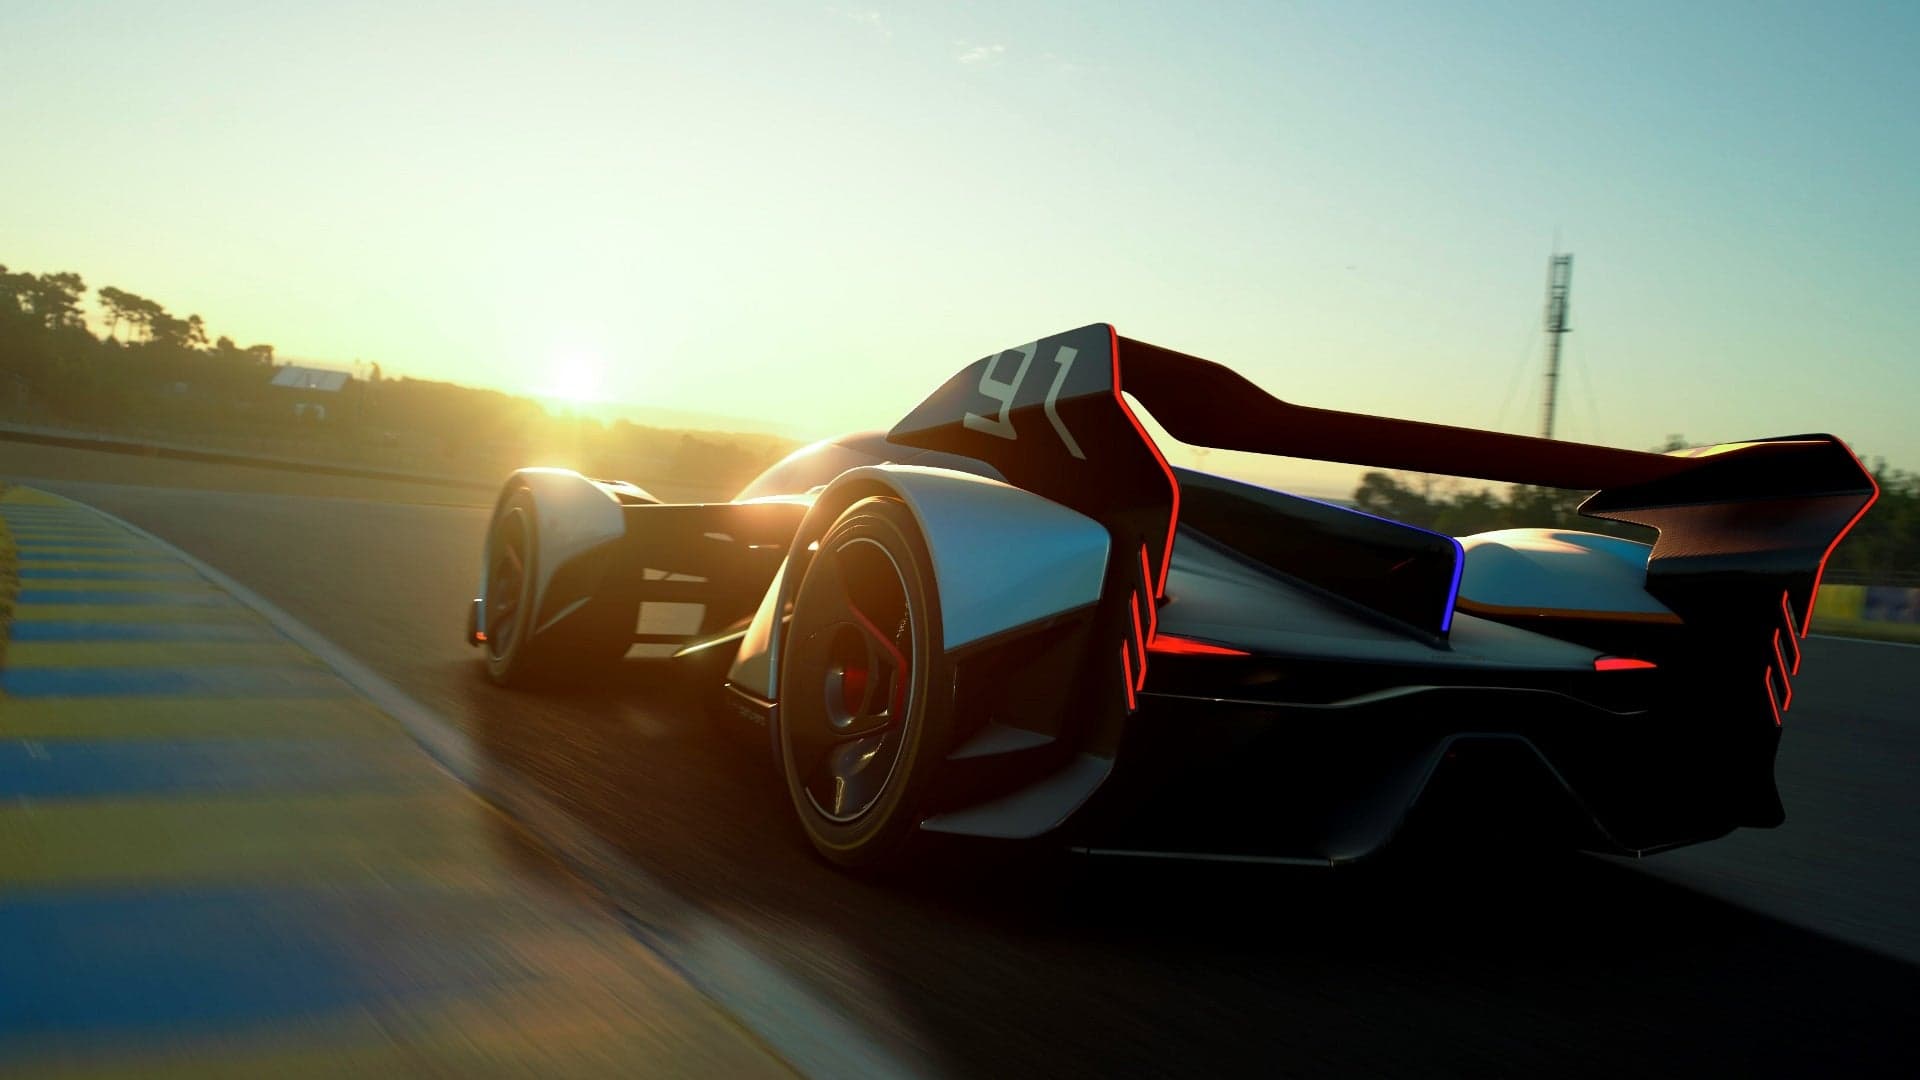 McLaren Ultimate Vision GT Hybrid Hypercar Concept Will Debut in ‘Gran Turismo Sport’ Video Game